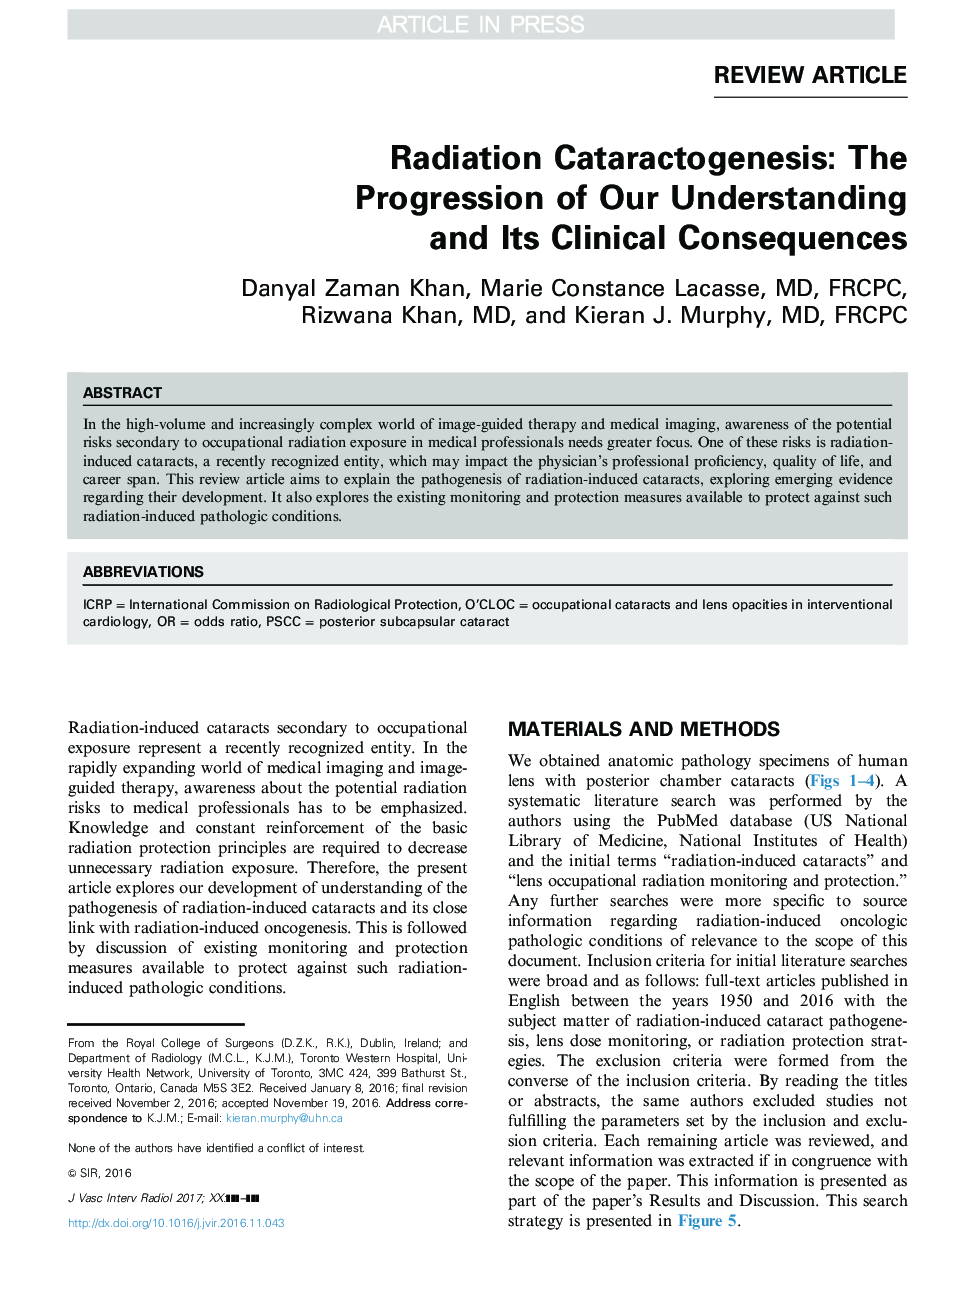 Radiation Cataractogenesis: The Progression of Our Understanding and Its Clinical Consequences